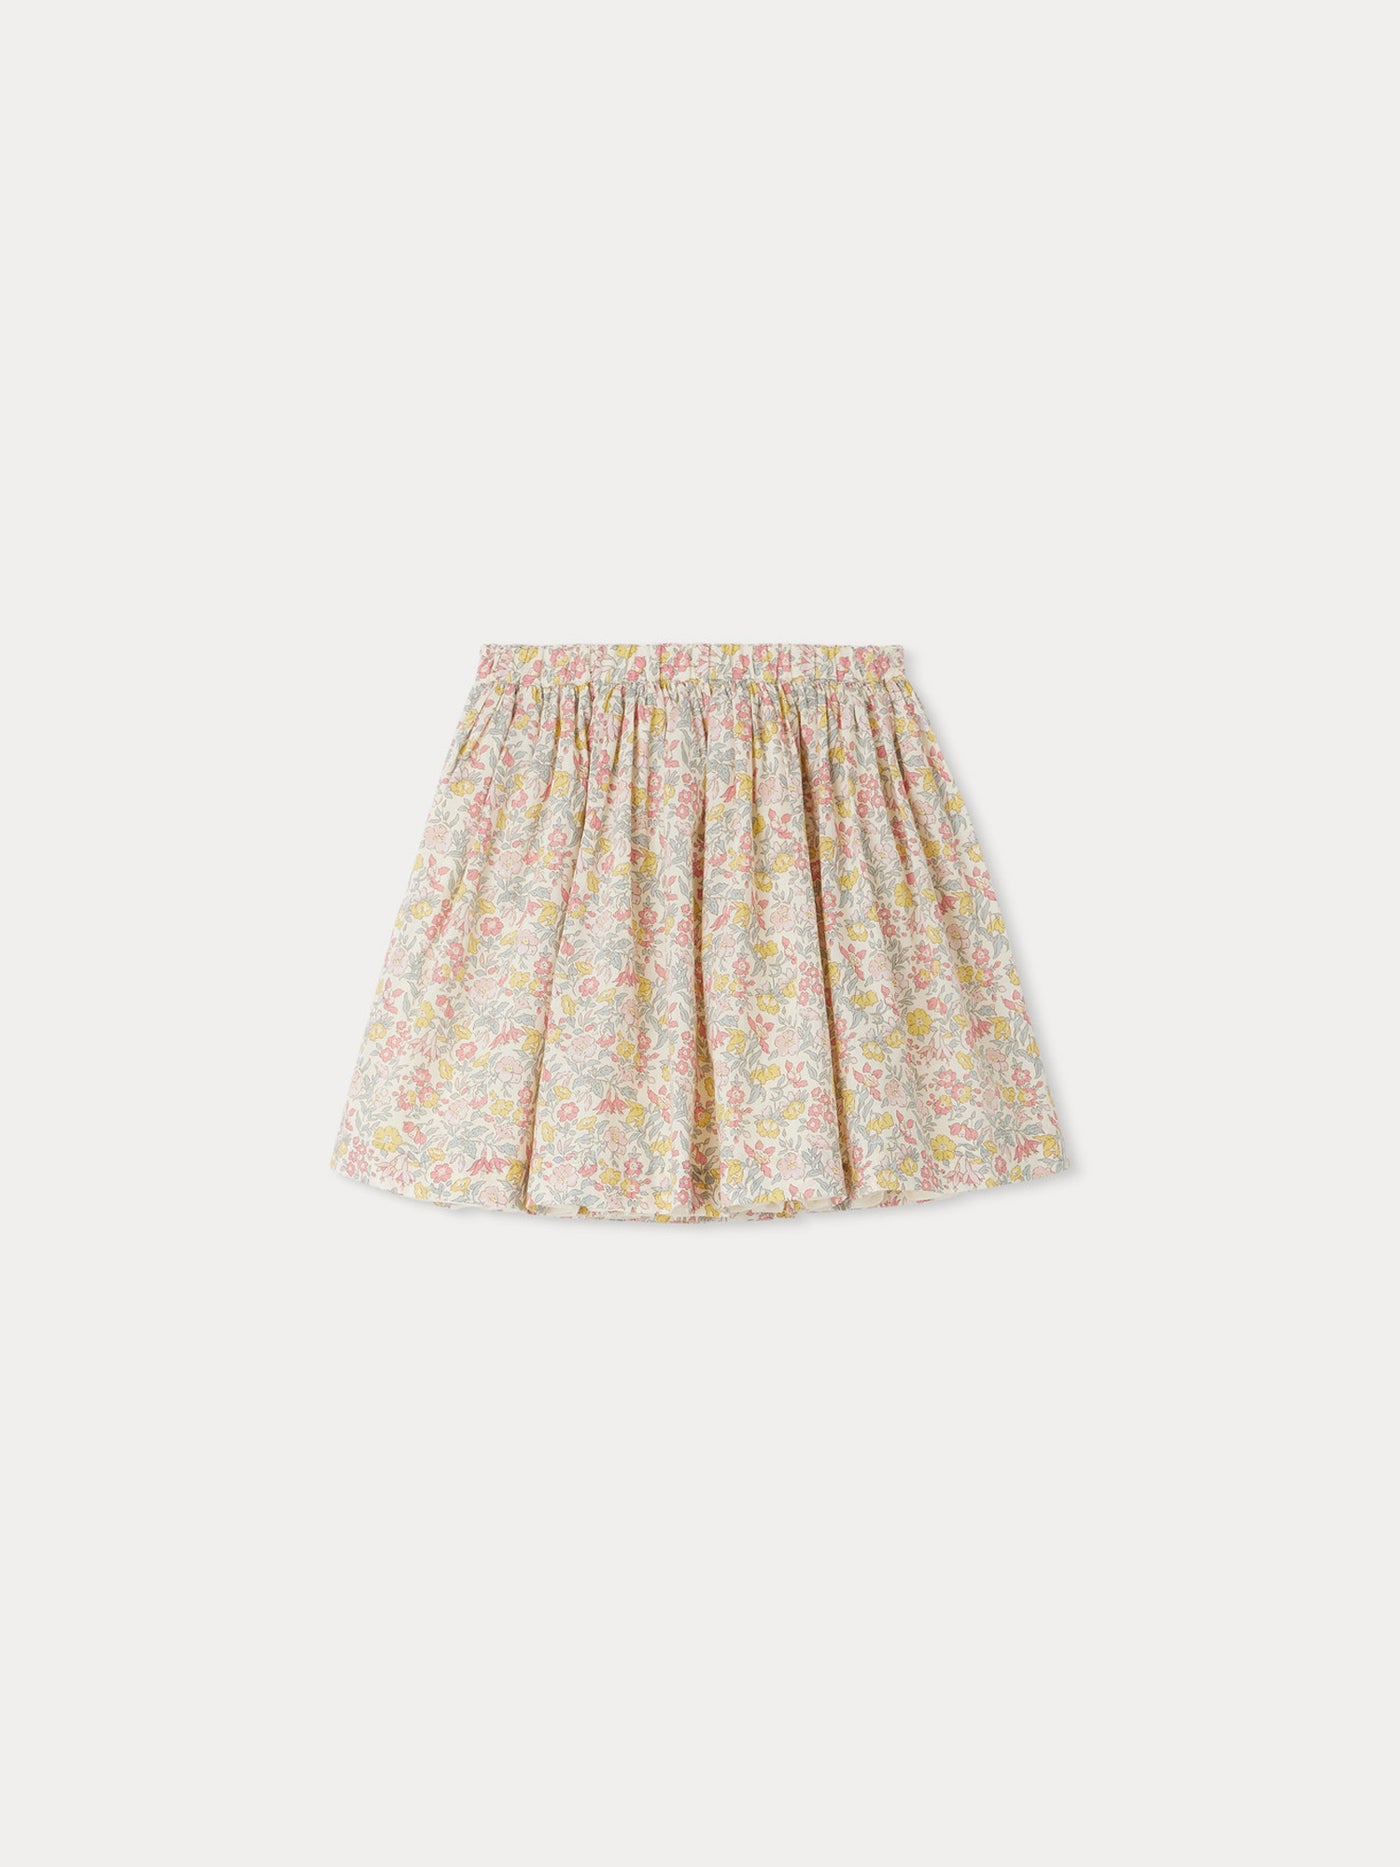 Suzon skirt in Liberty fabric